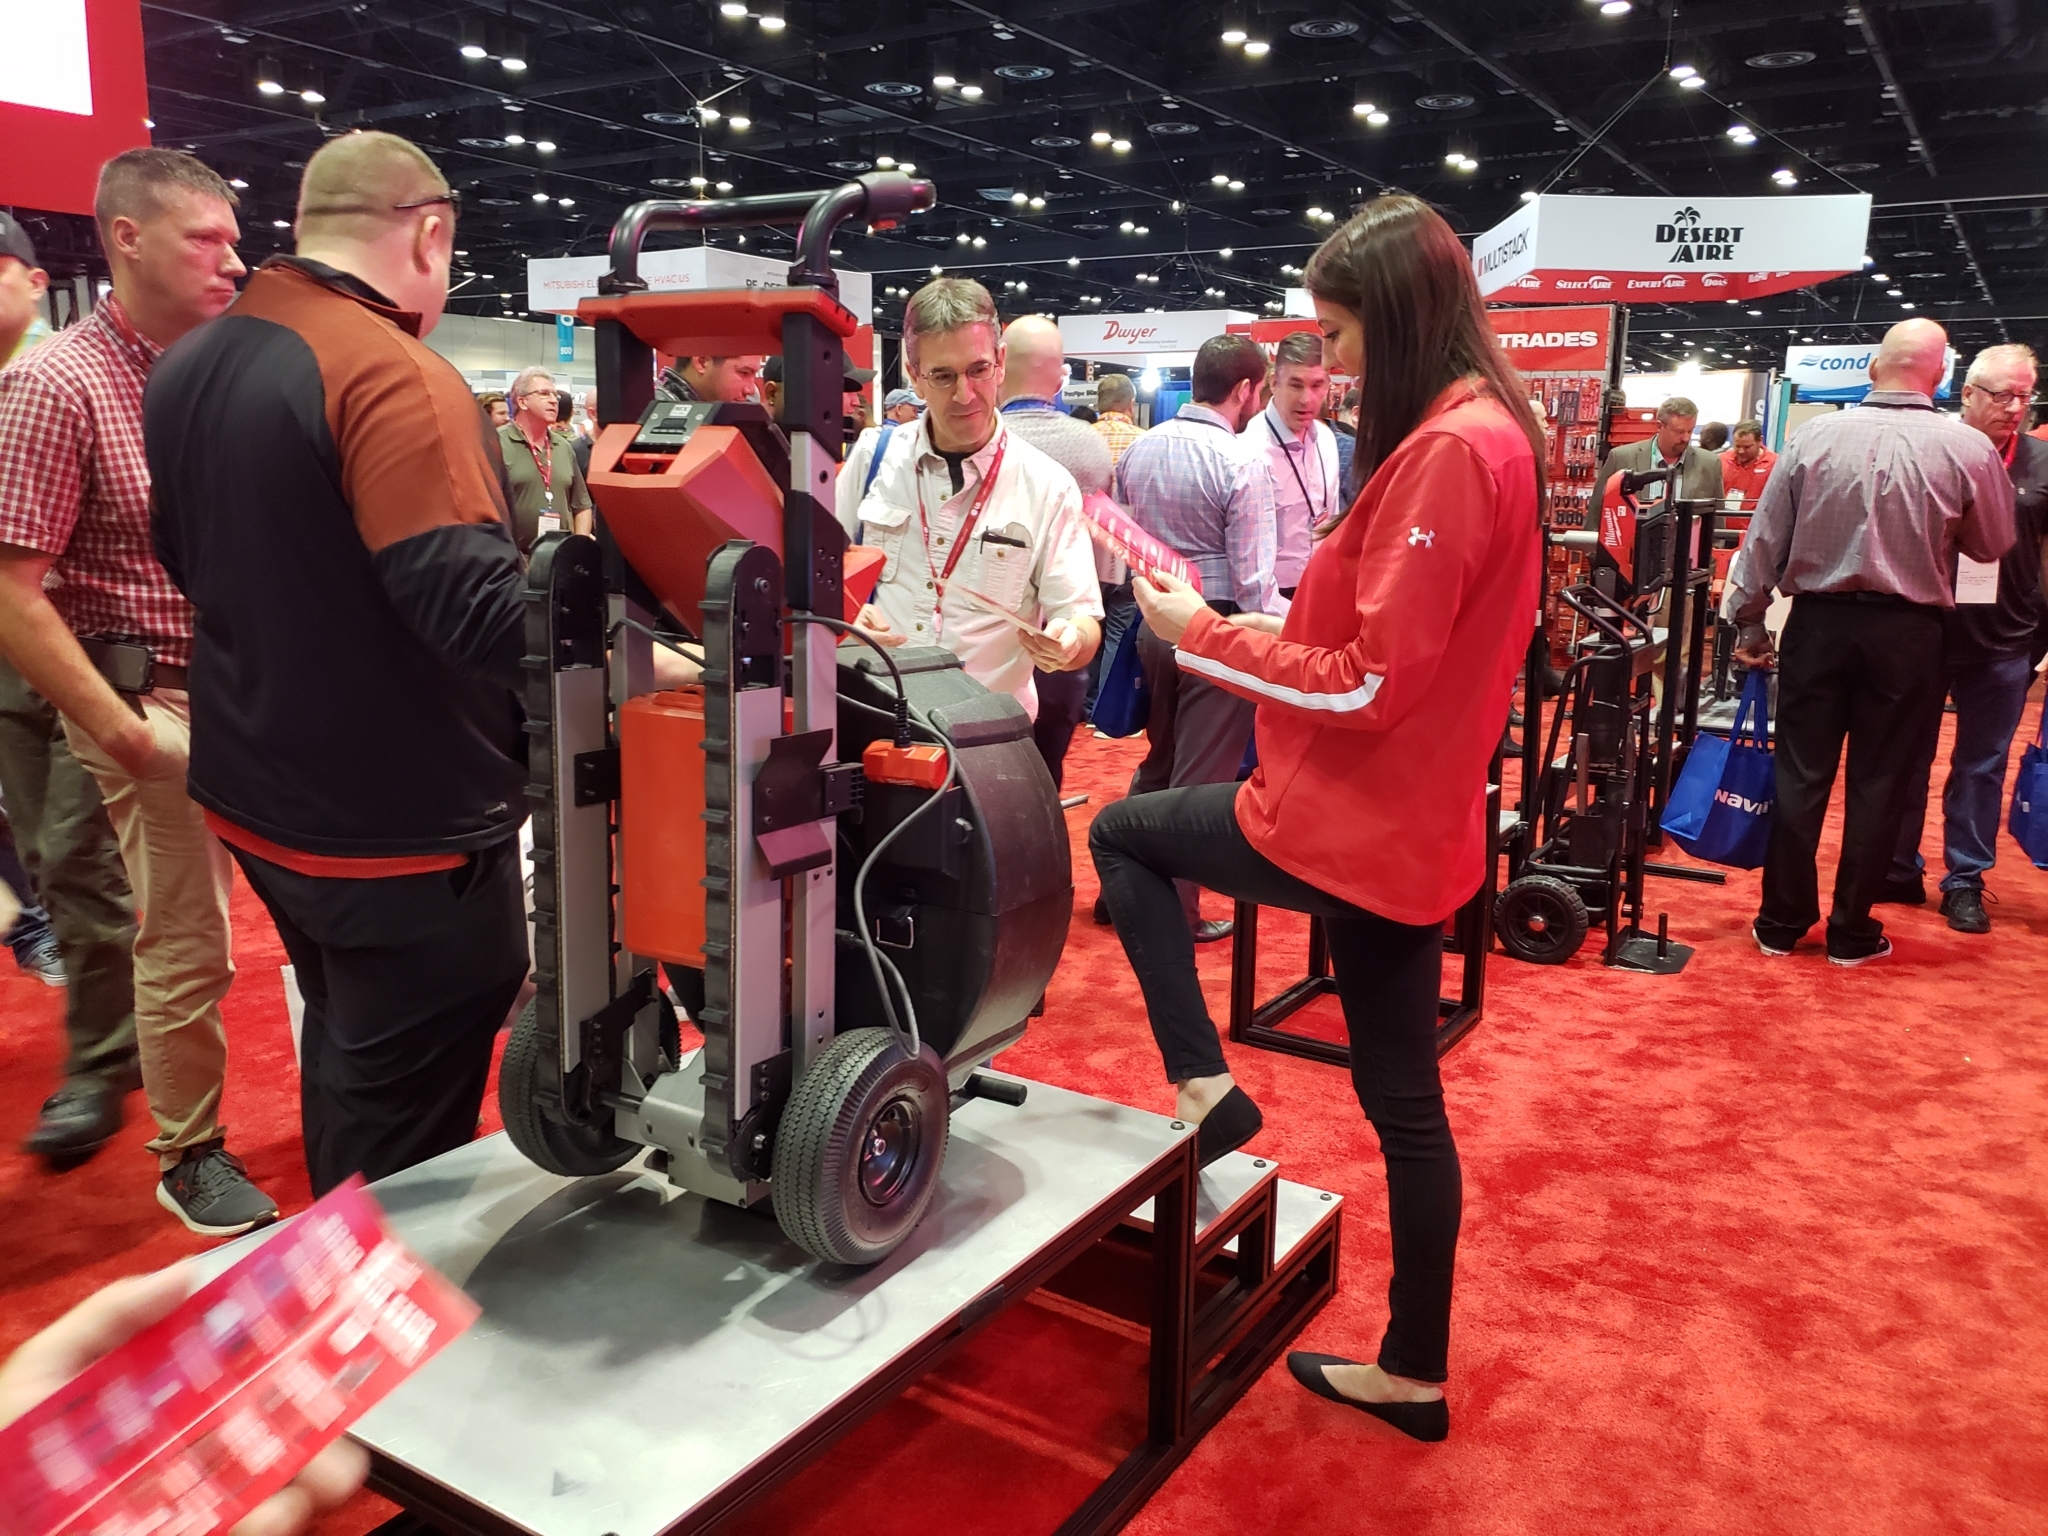 A Milwaukee Tool representative shows AHR Expo attendees the new MX FUEL drum drain cleaning machine, which has a built-in stair climber.